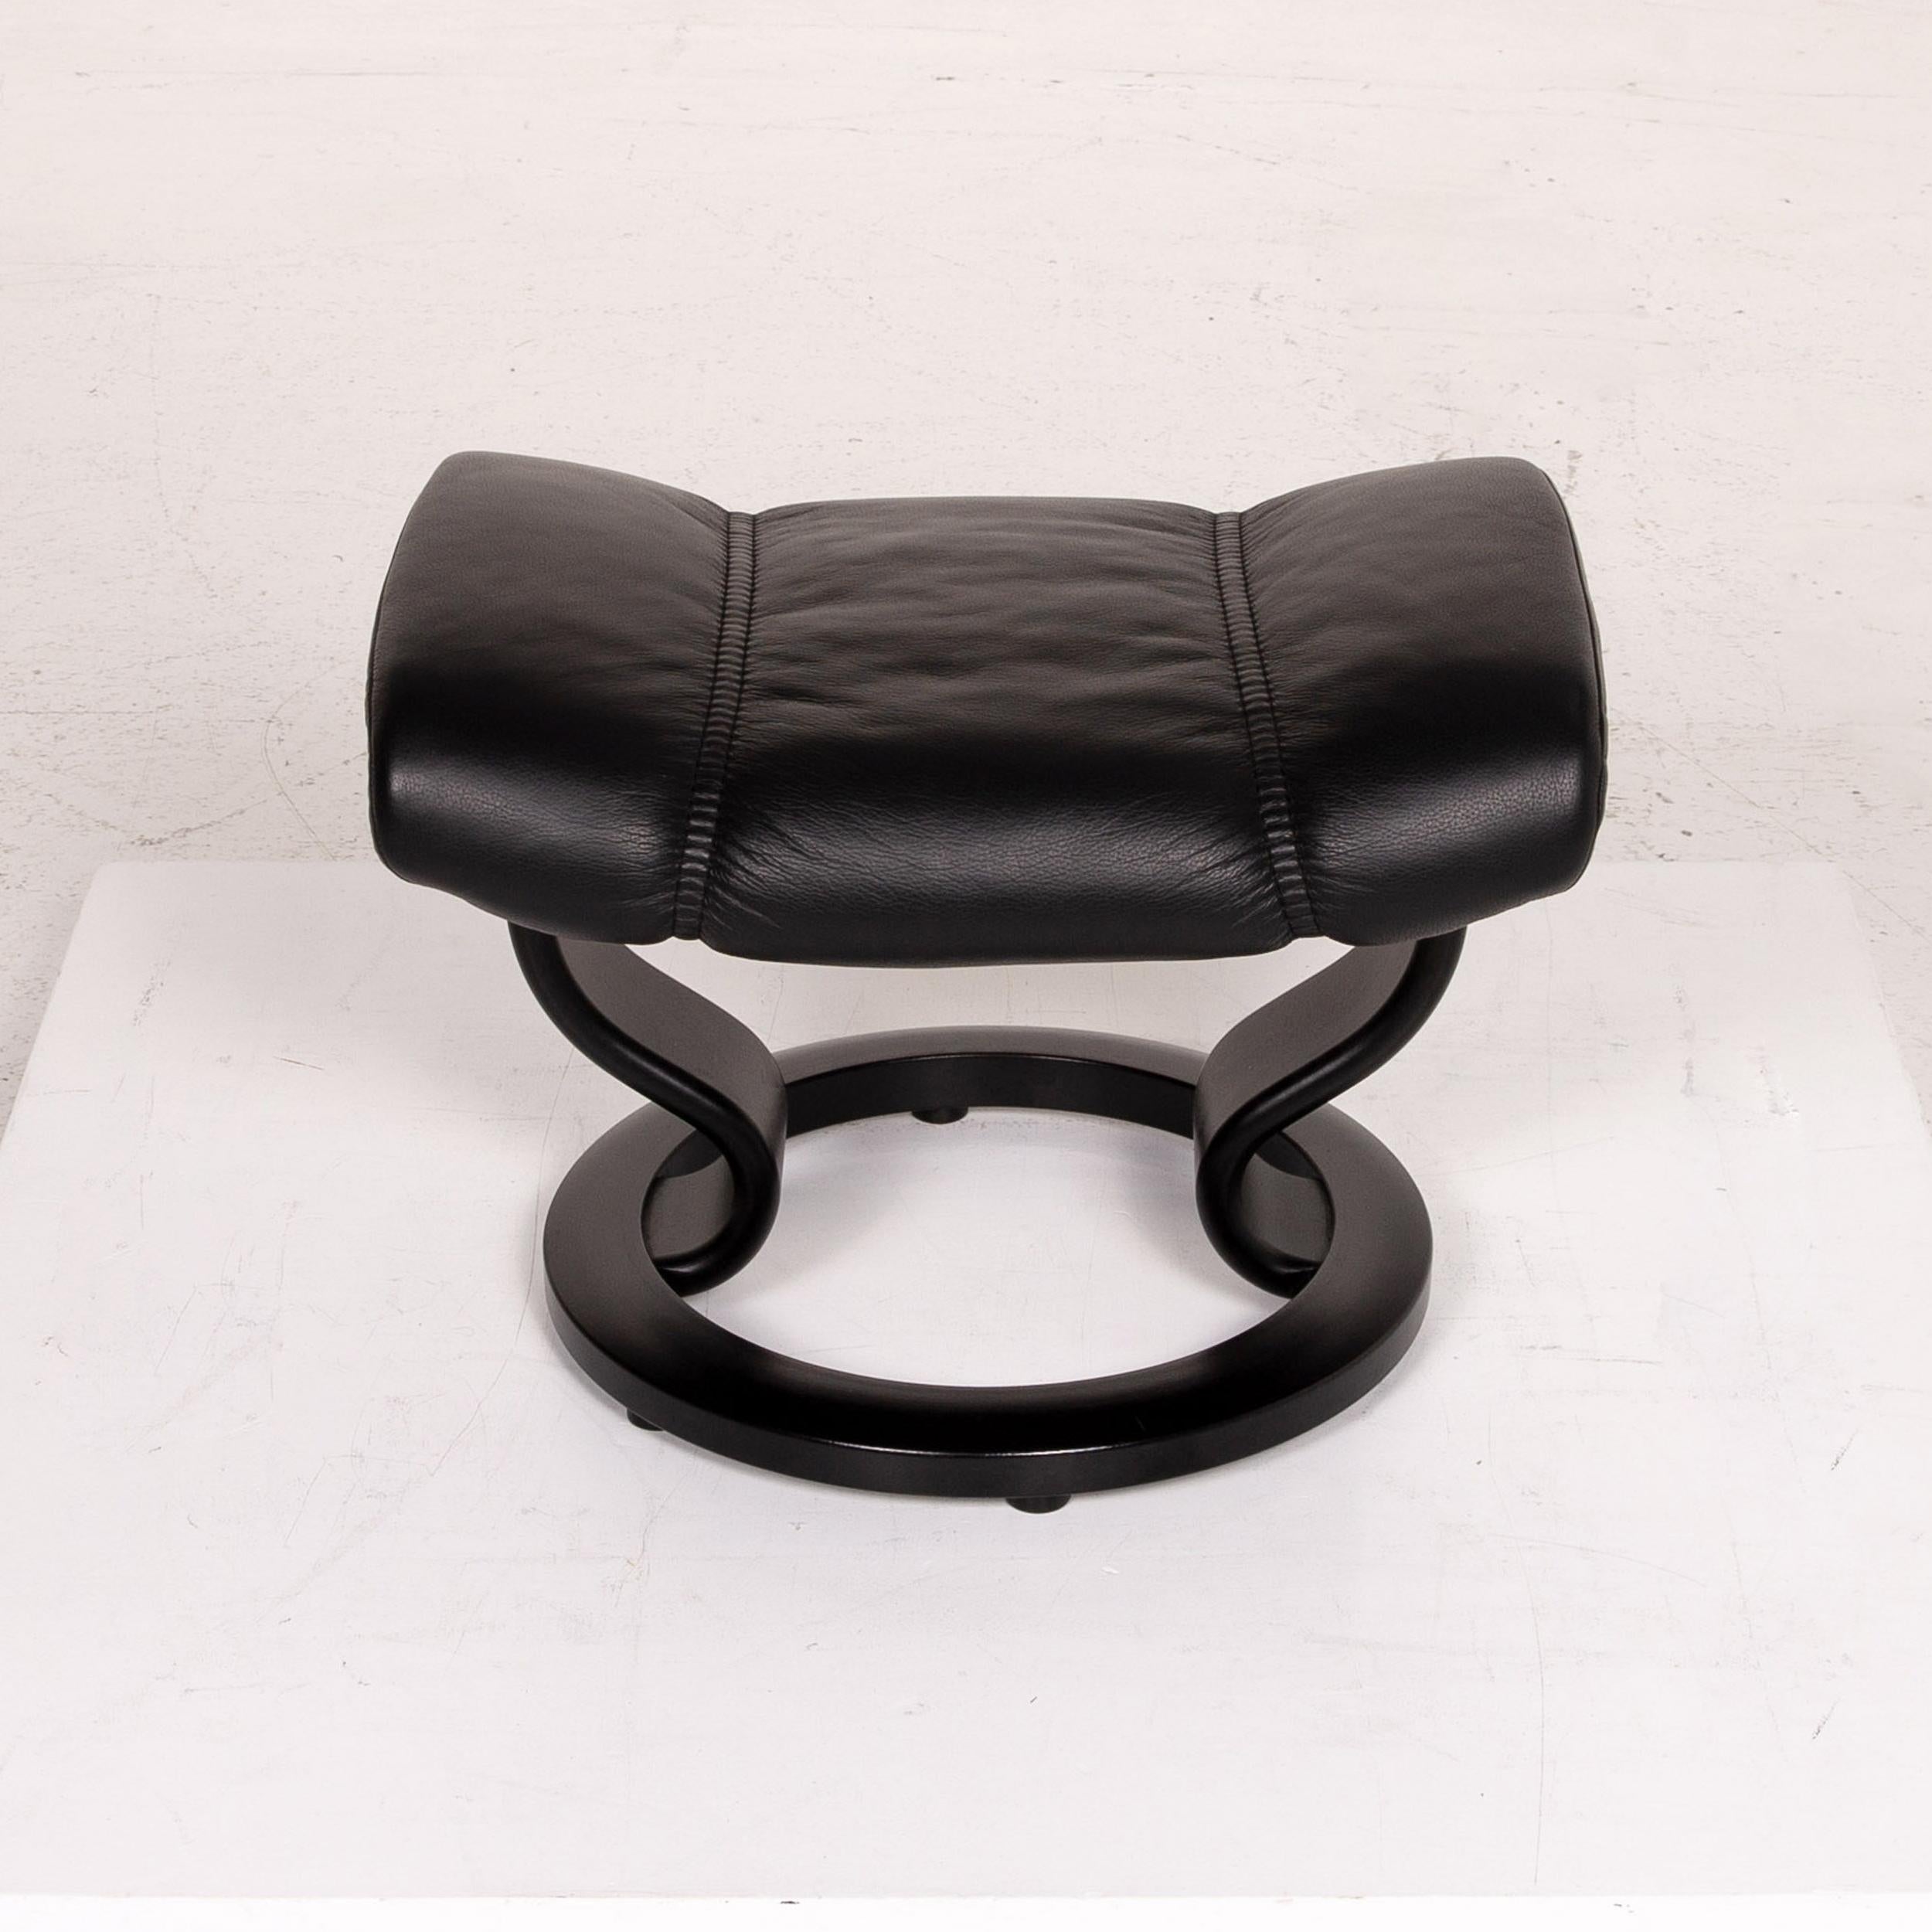 Stressless Consul Leather Armchair Incl. Stool Black Relaxation Function 9